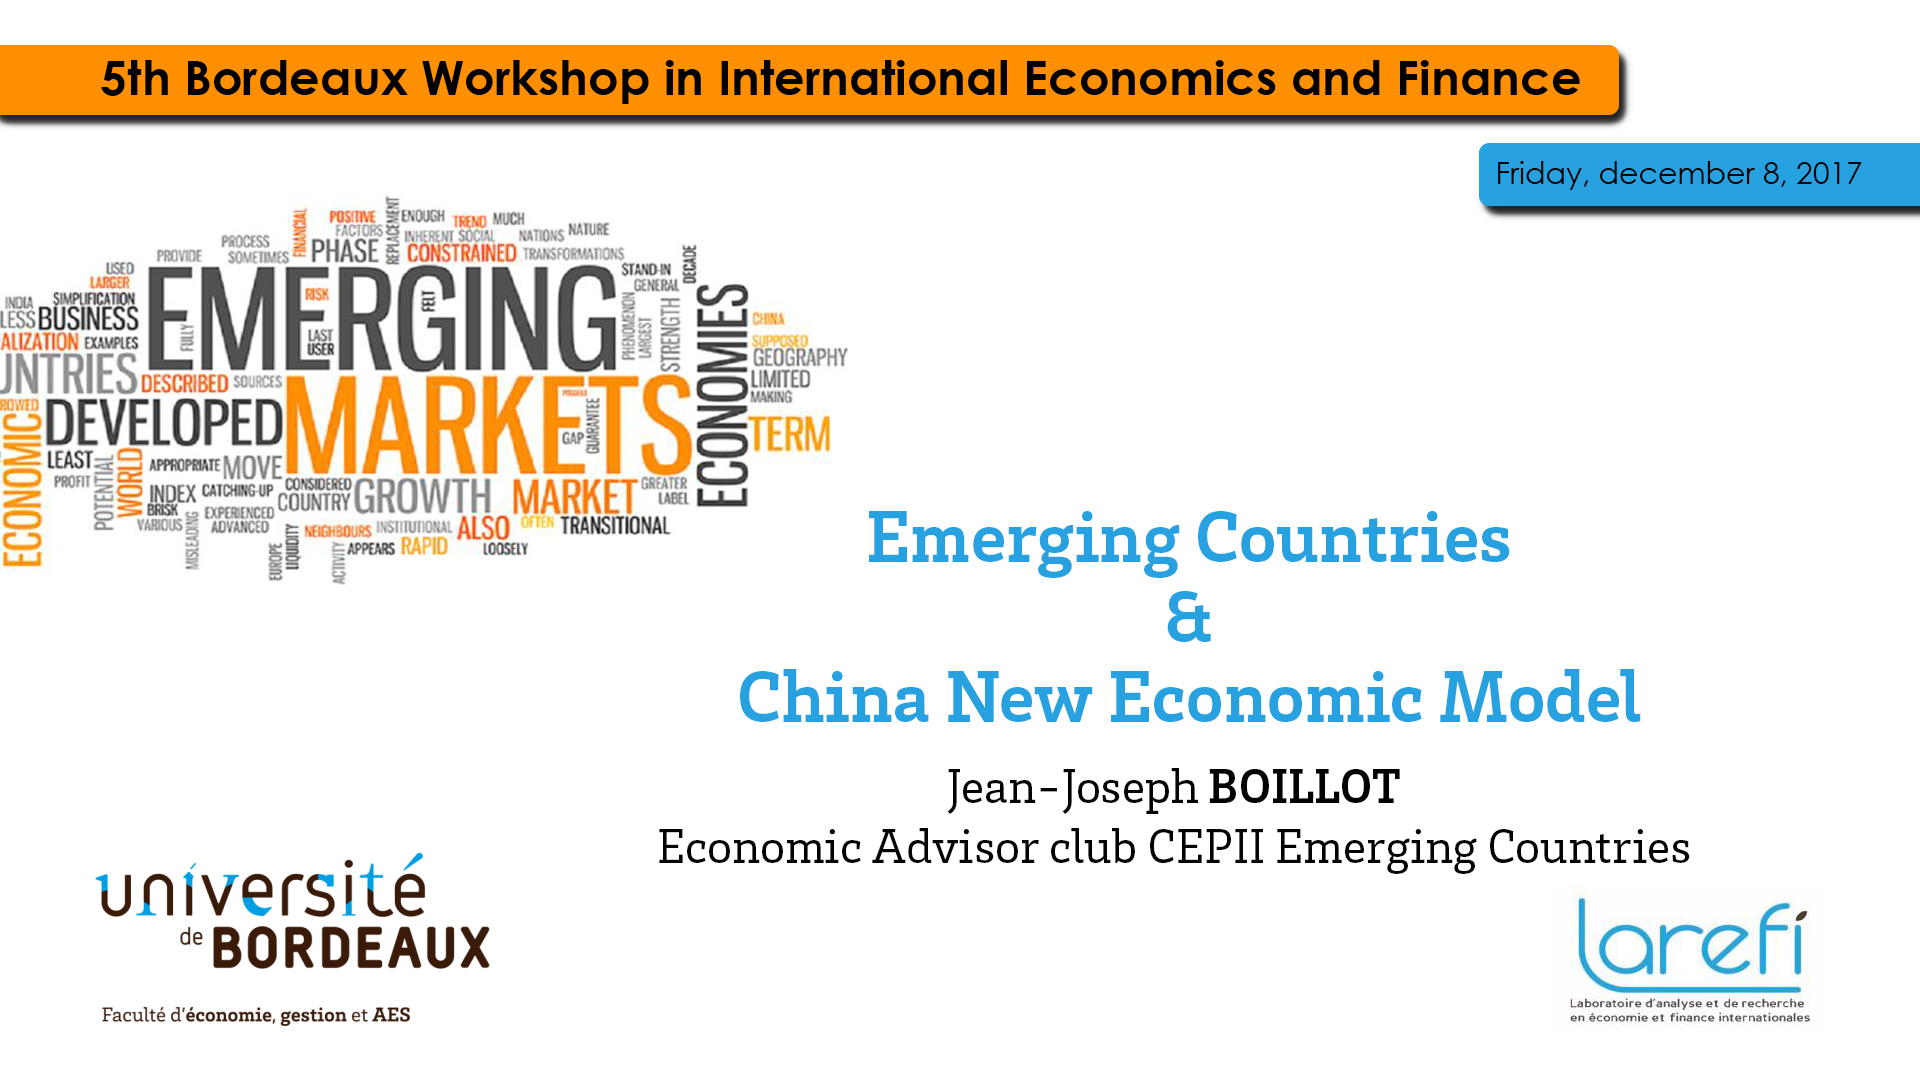 Emerging countries and China new economic model